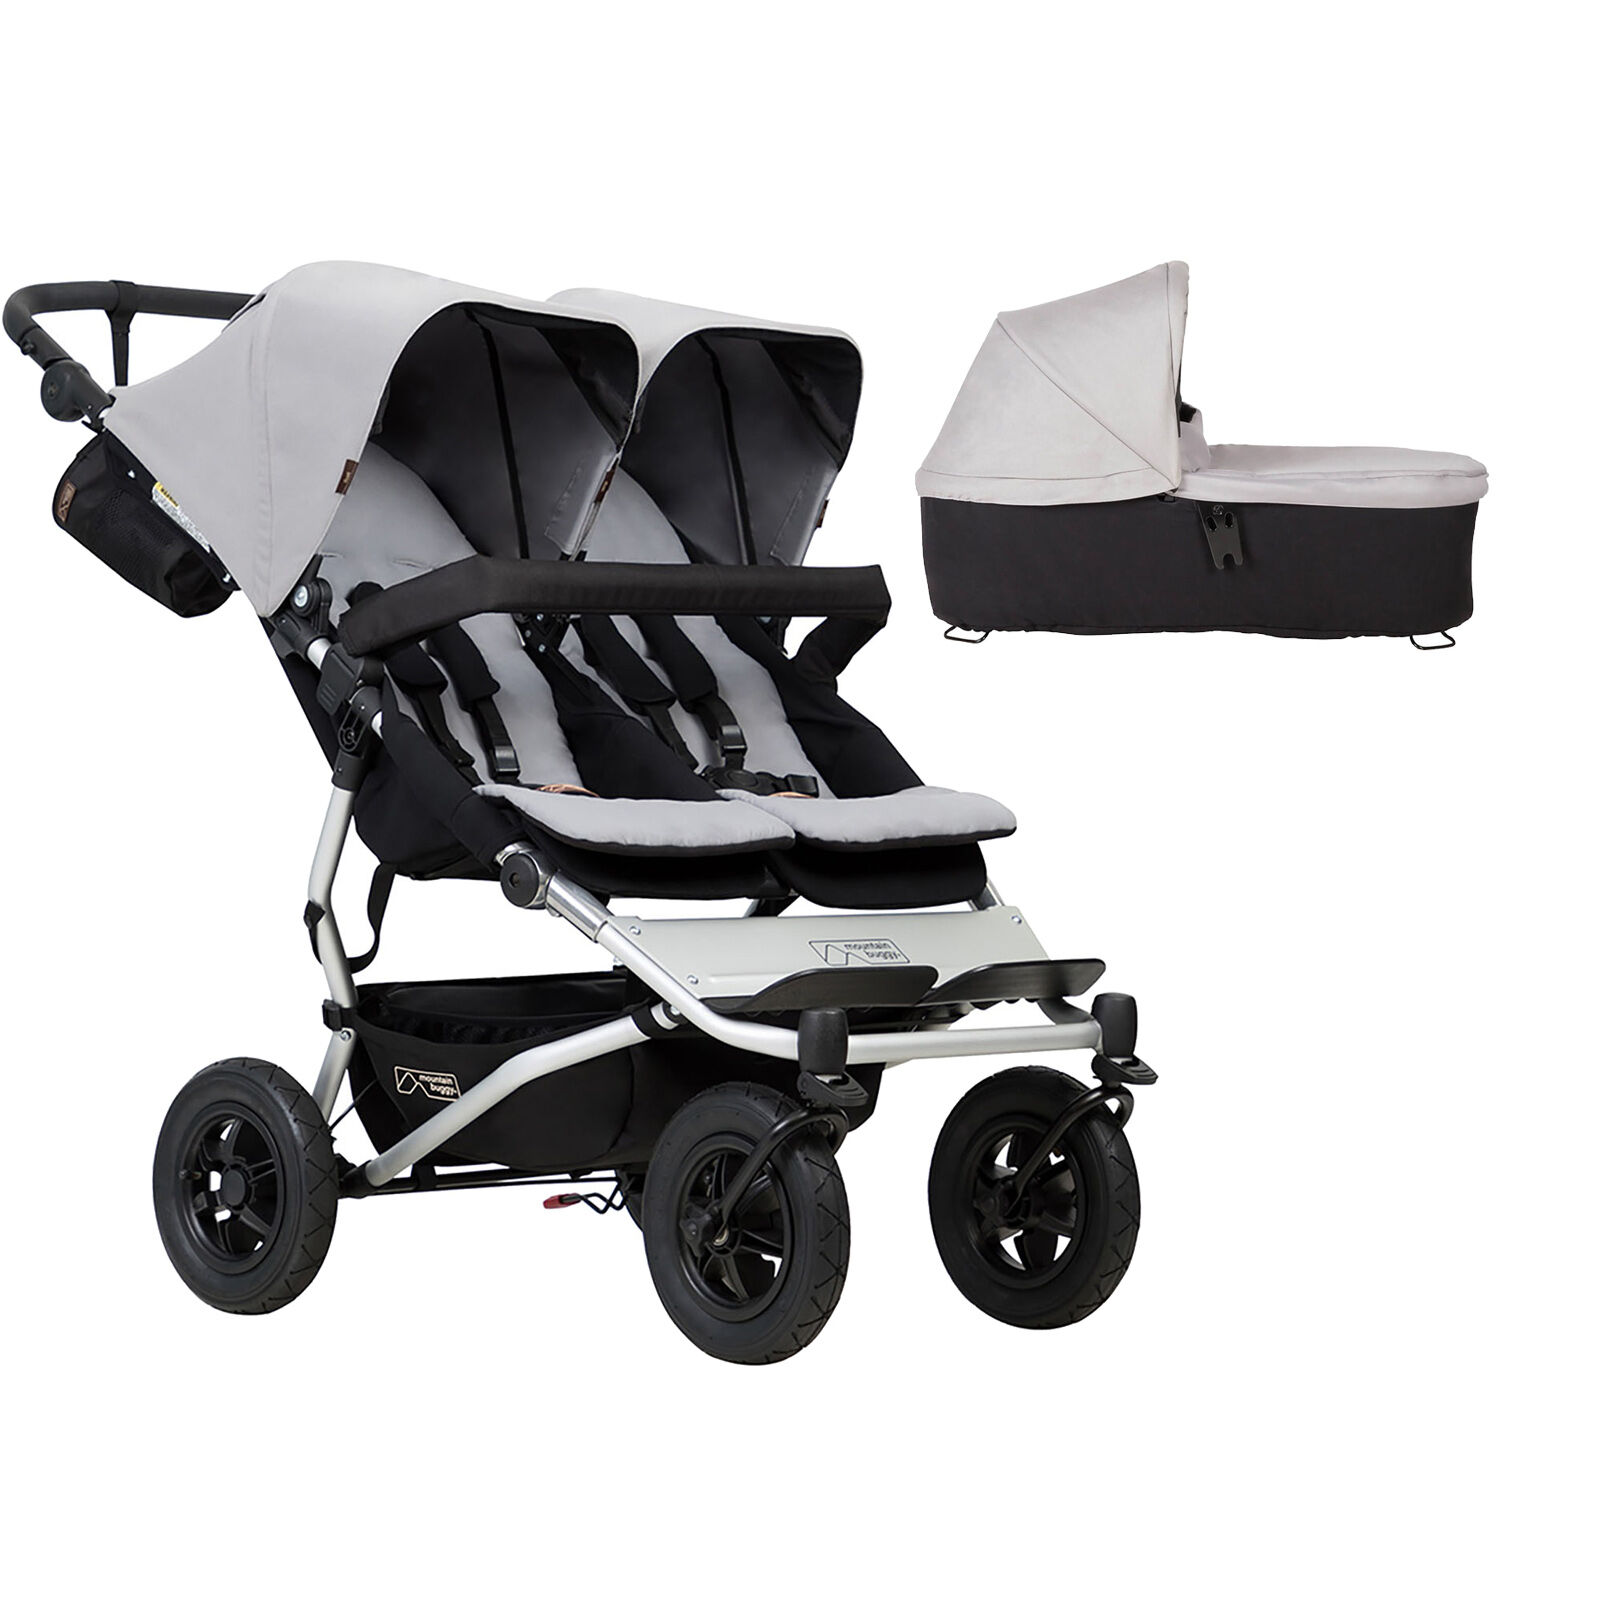 Mountain Buggy Duet V3 Twin Pushchair & Duet Plus Carrycot - Silver